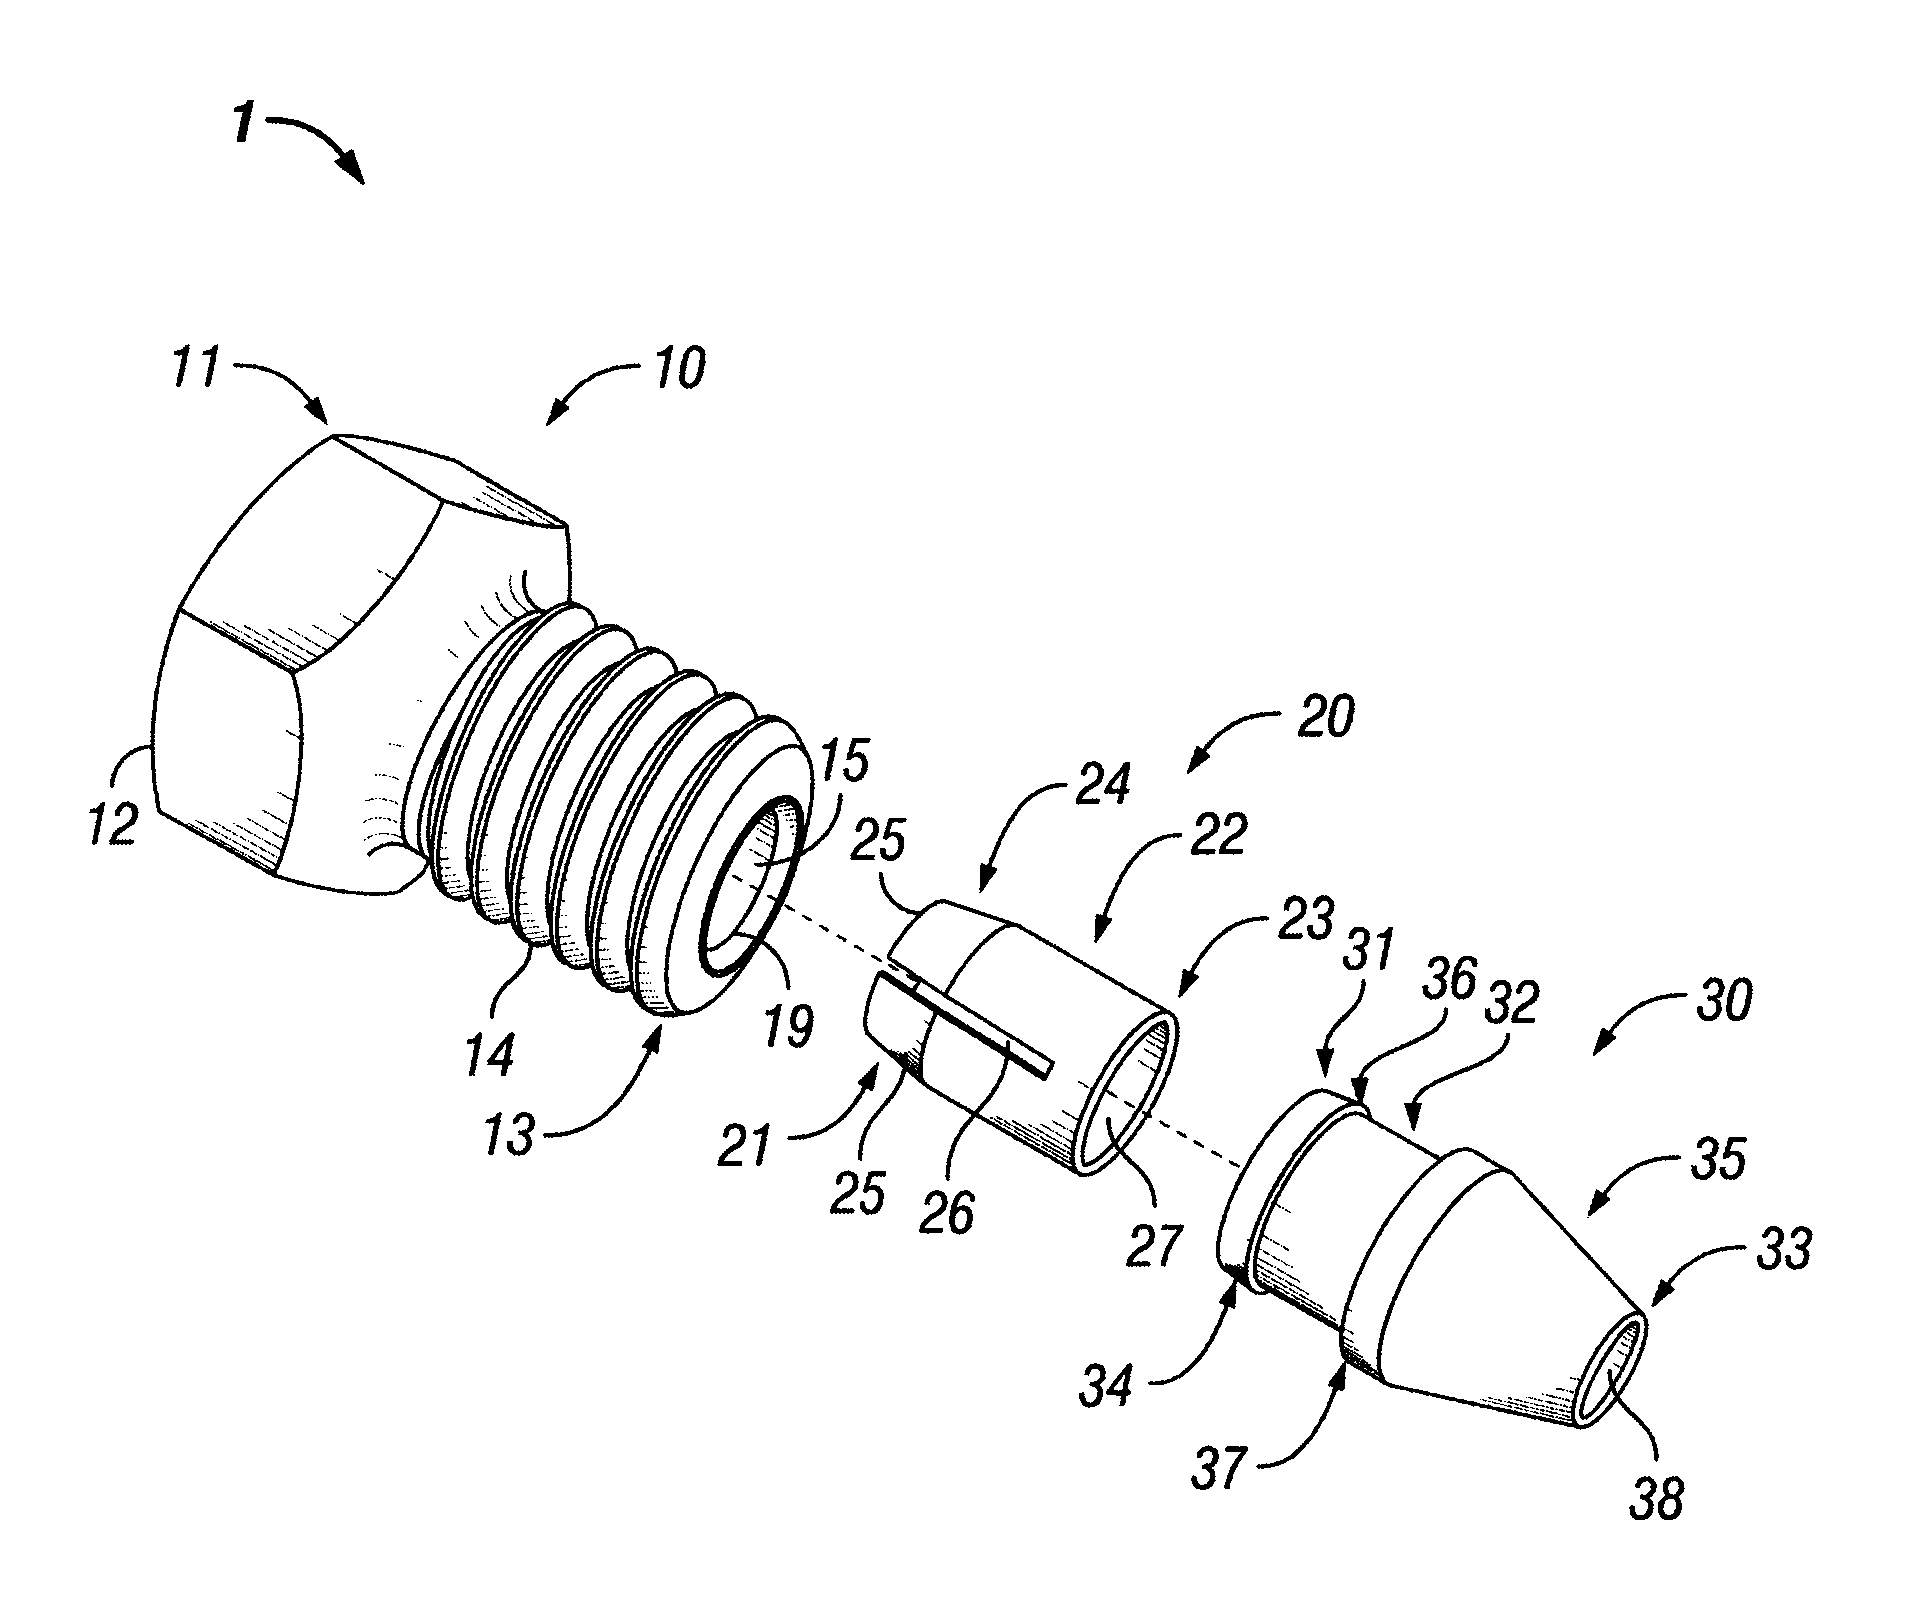 Connection Assembly for Ultra High Pressure Liquid Chromatography